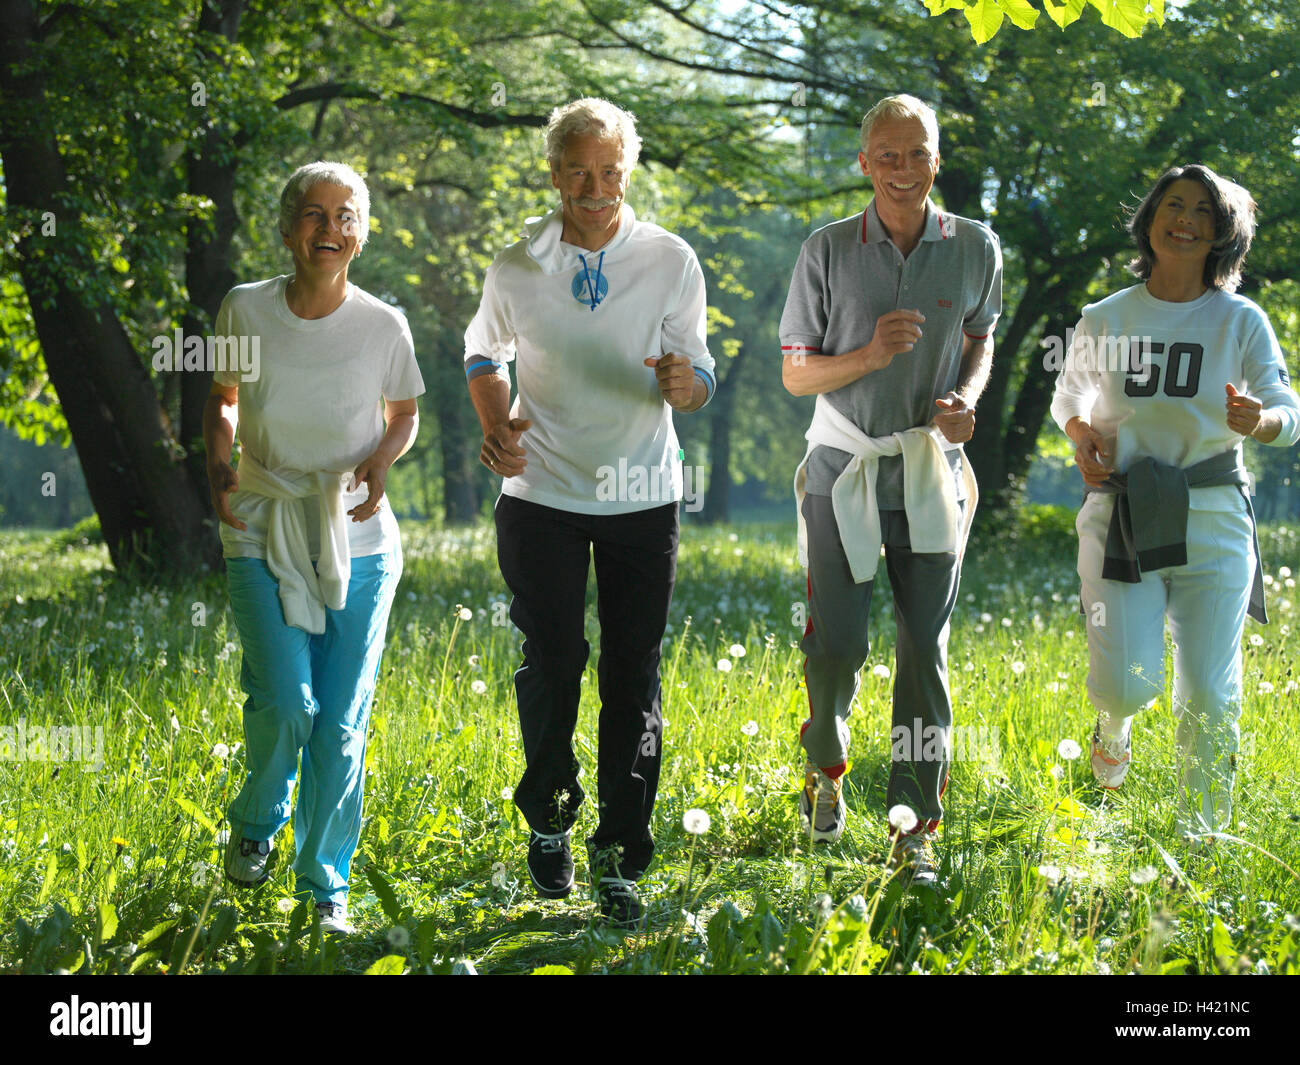 Wood, lumen, senior citizens, jog group, group picture, senior citizen's  group, Best Age, friends, four, together, fun, motion, actively, activity,  fit, fitness, vital, vitality, sportily, sport, run, running, jogging,  summer, outside, nature,